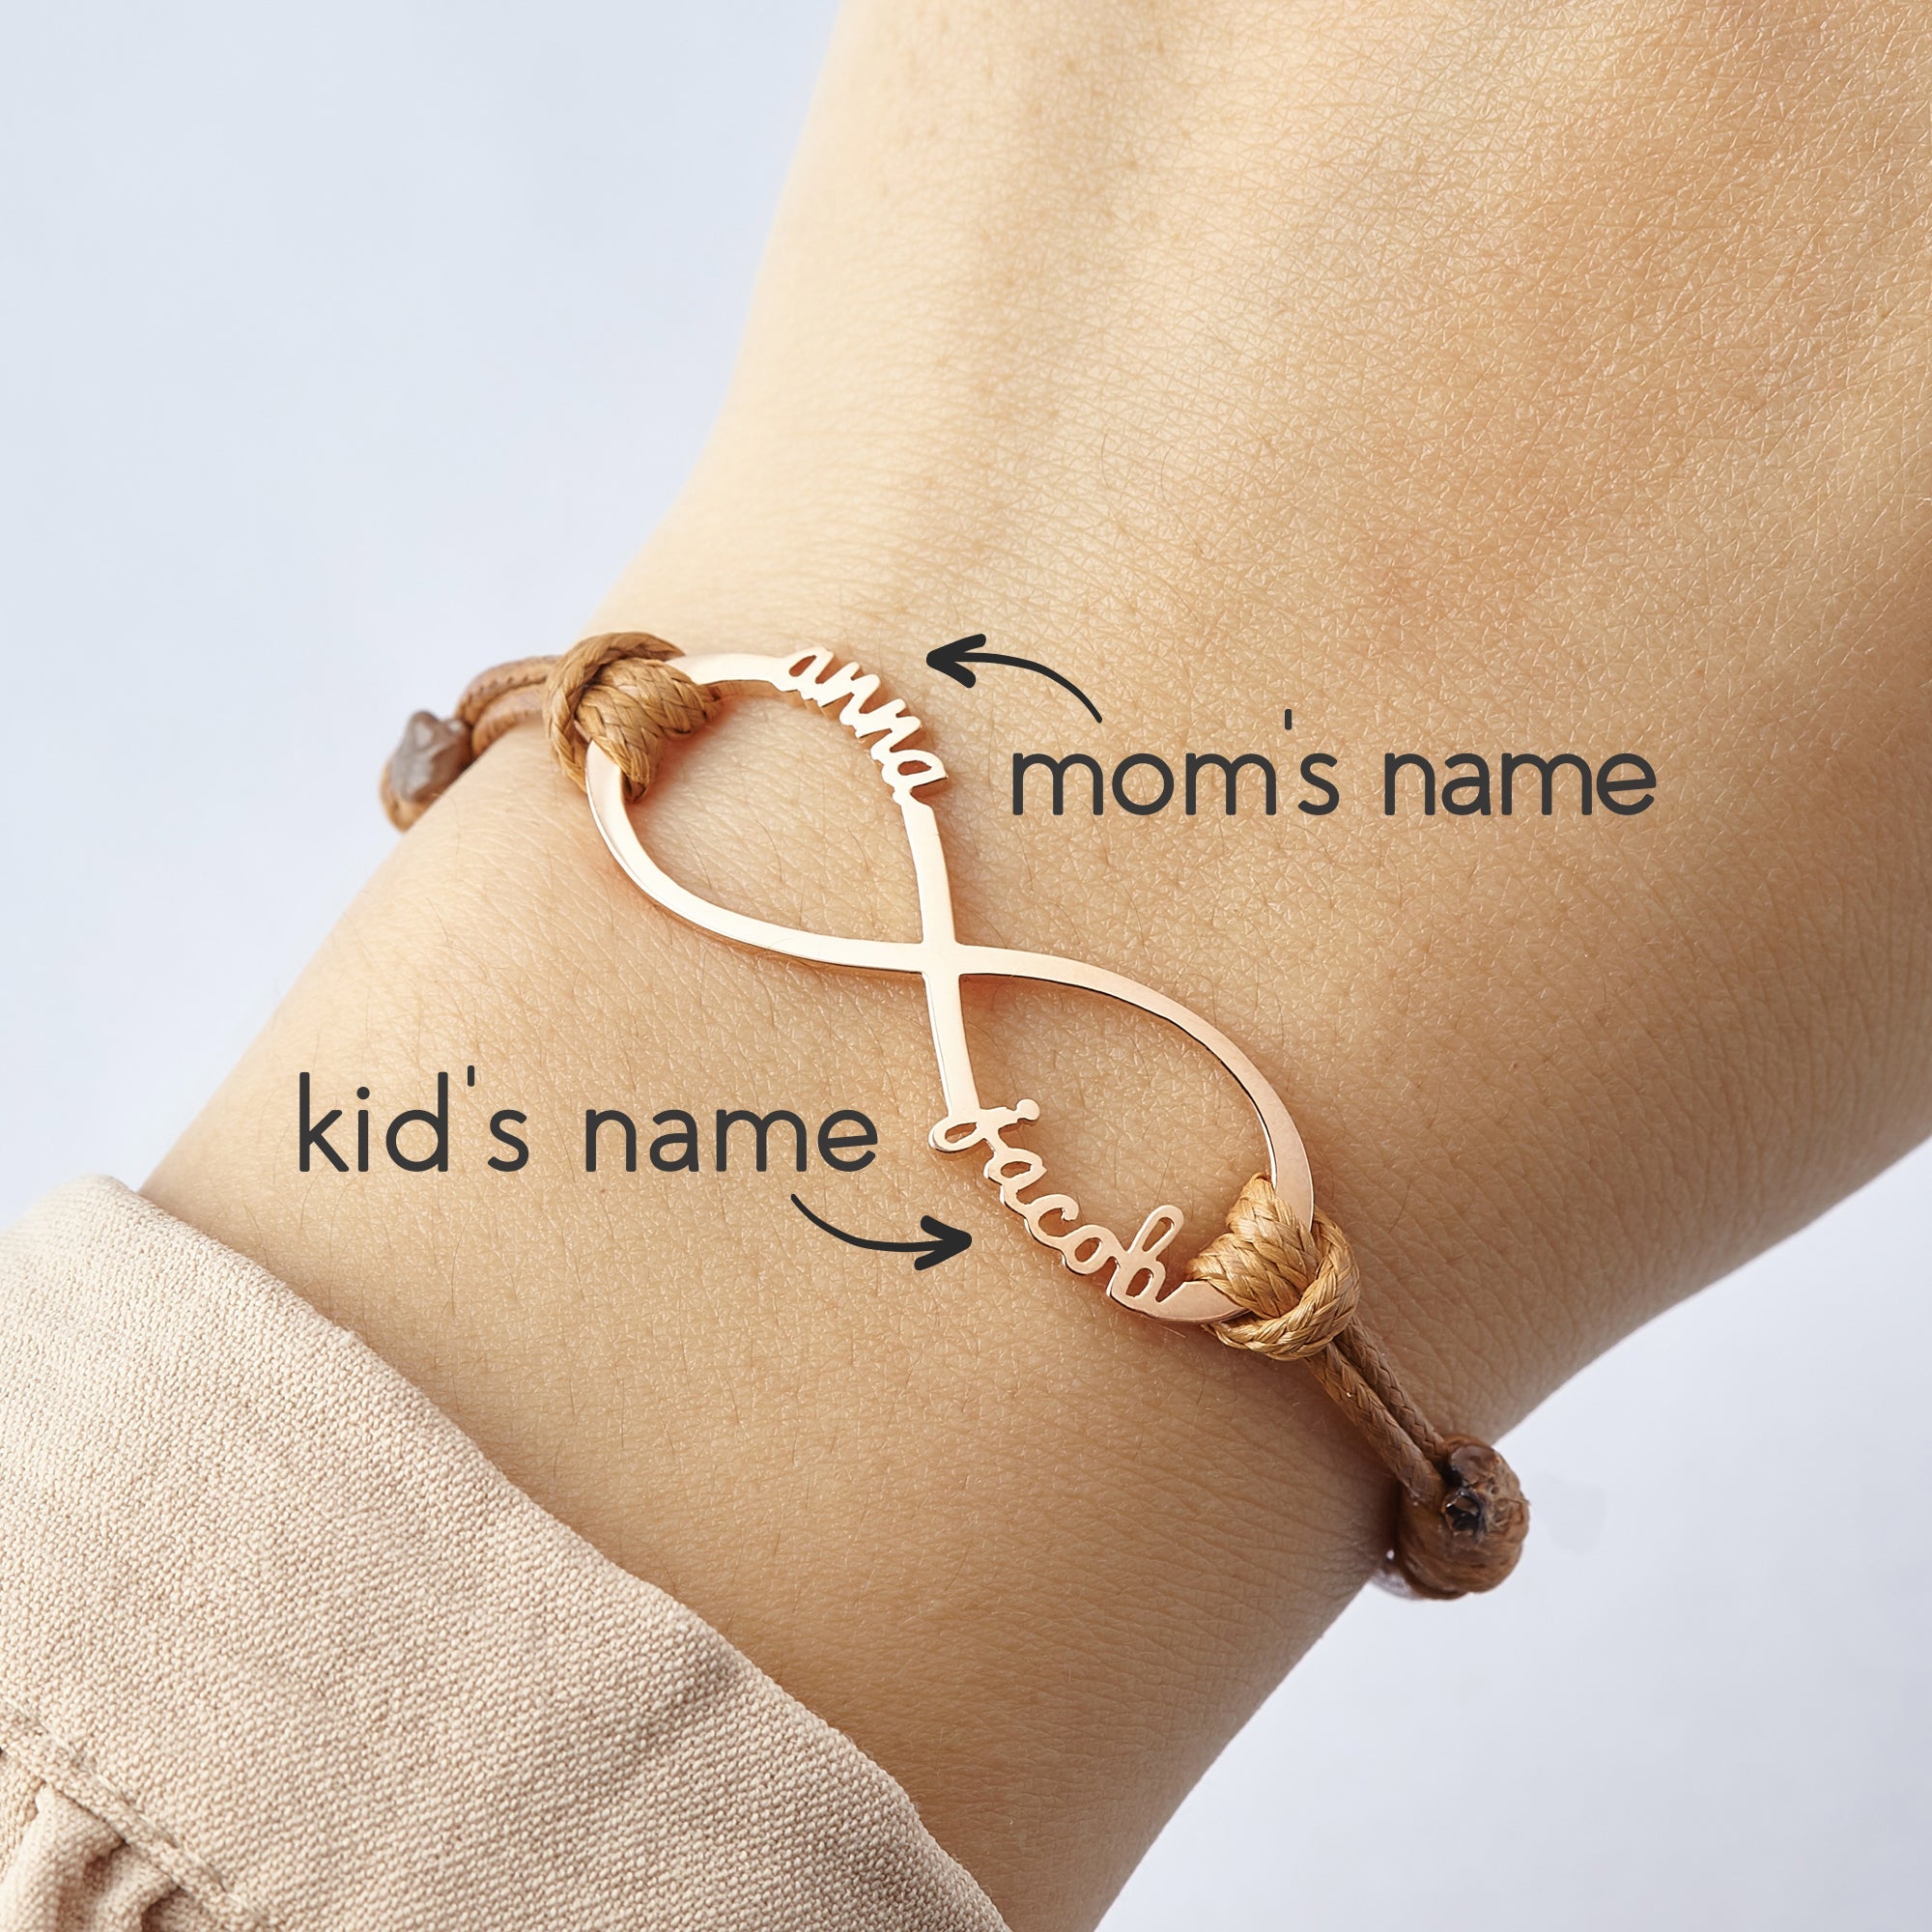 21 Best Jewelry Gifts for Mom That She Will Love in 2023